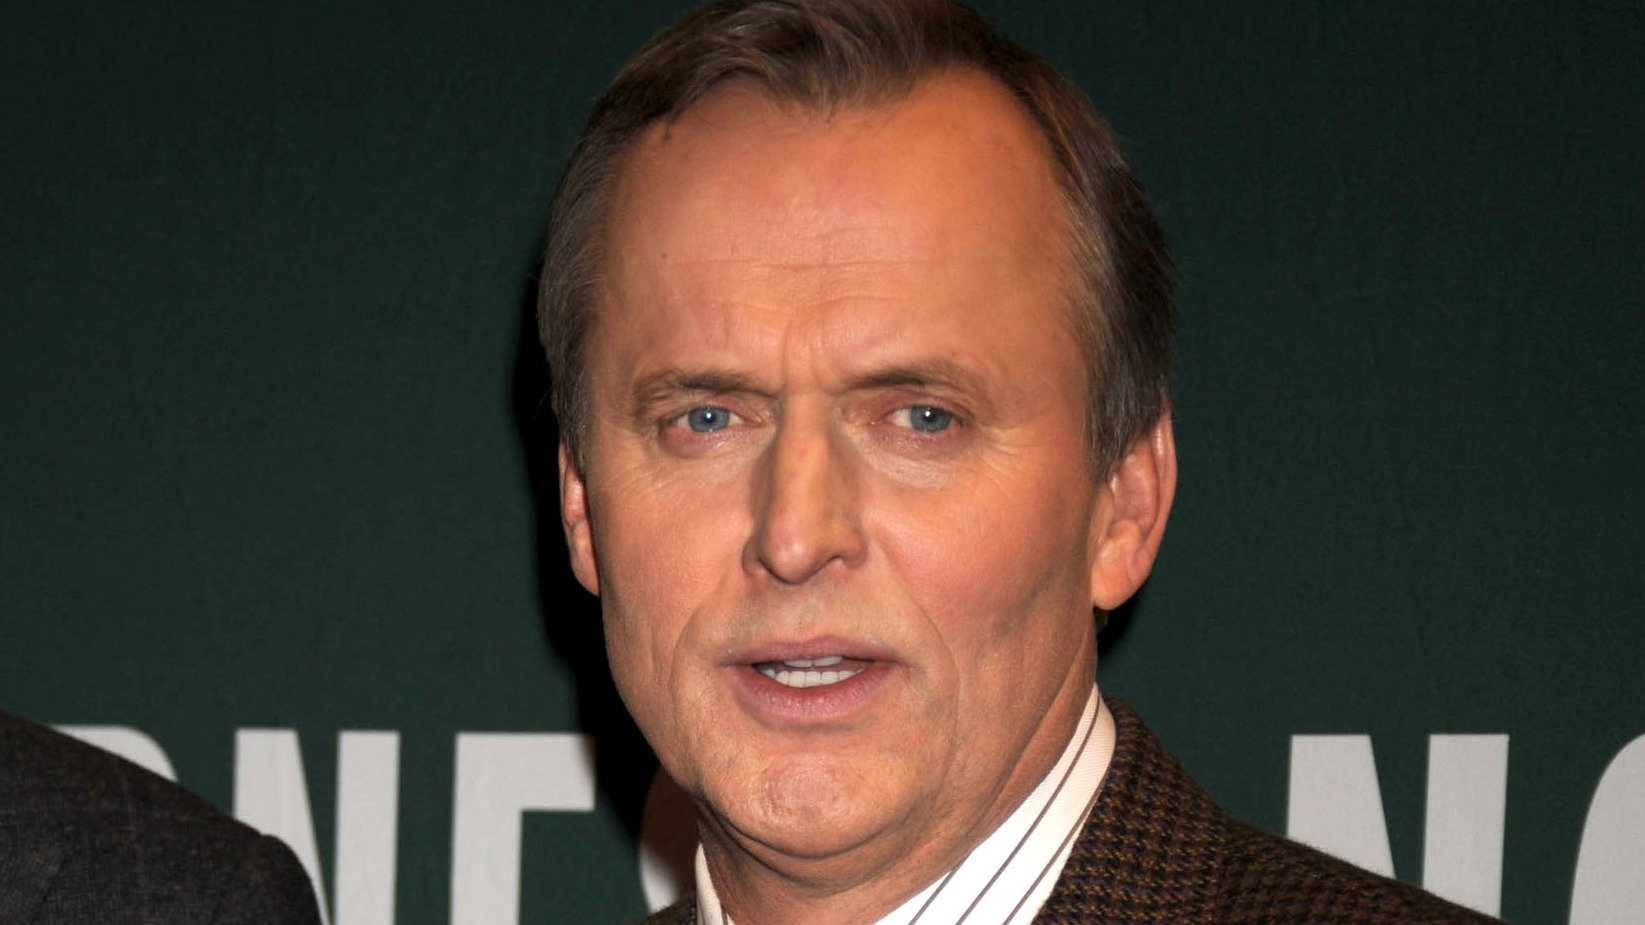 Author John Grisham Sparks Controversy With Defence Of Men Who View 